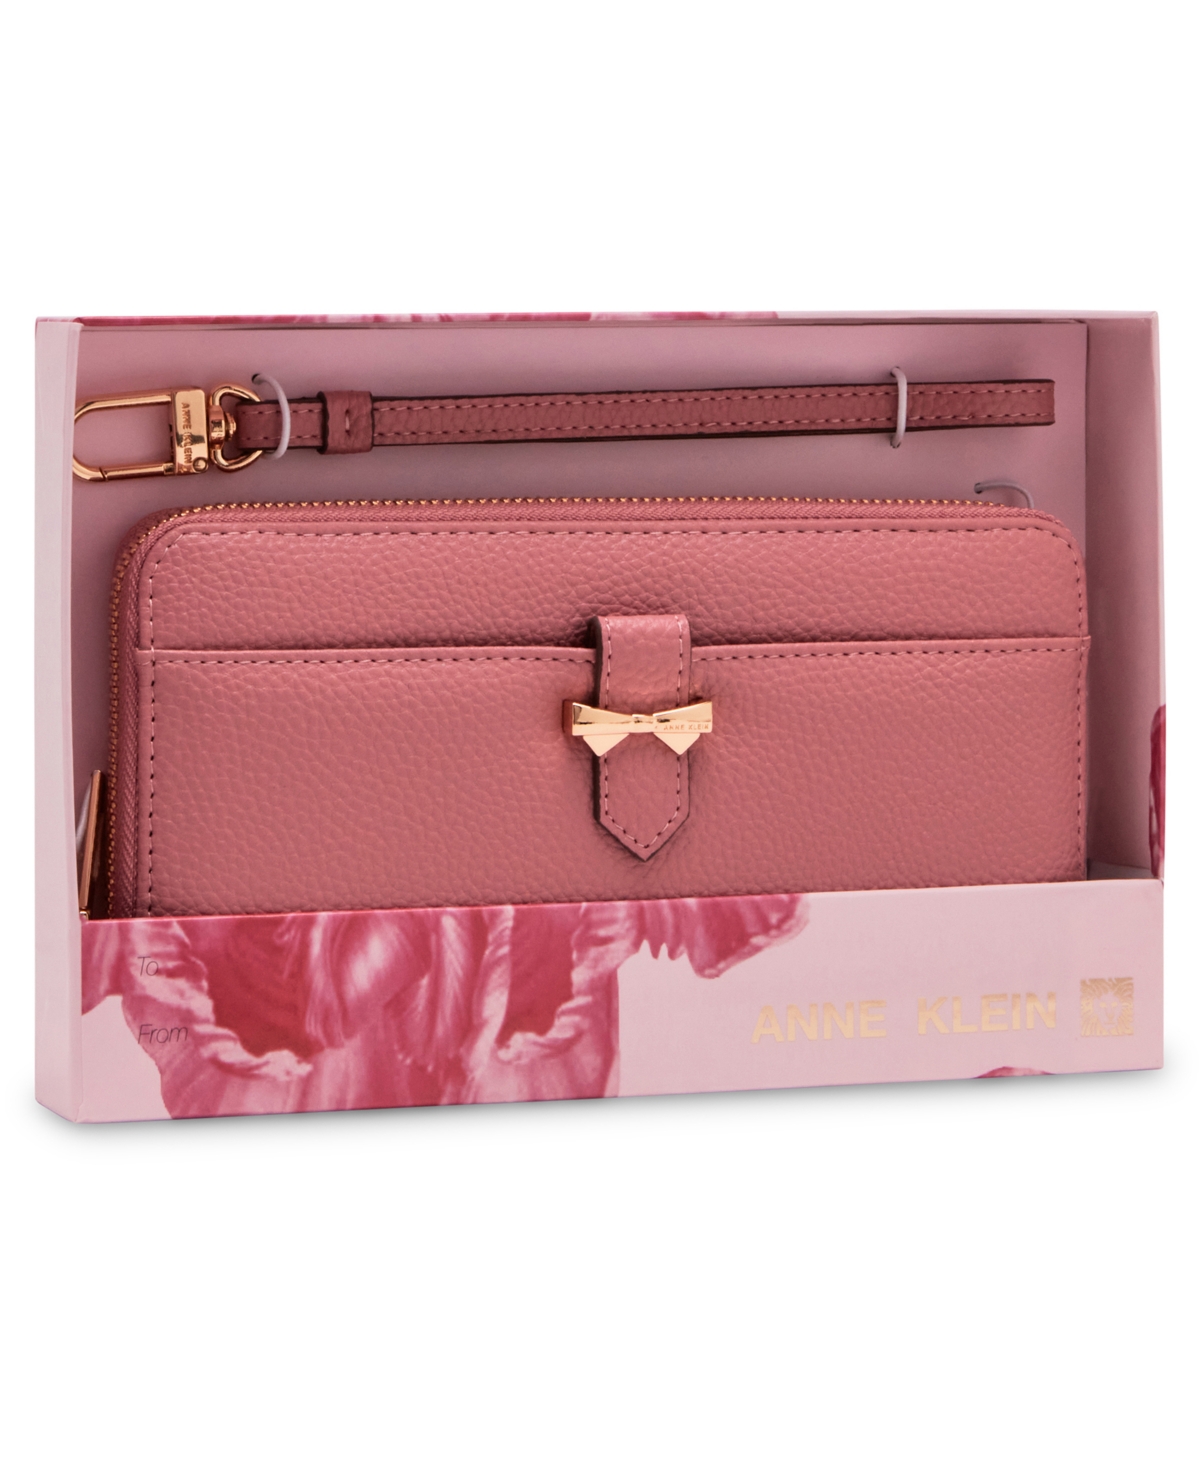 Anne Klein Ak Boxed Slim Zip Wallet With Bow Detail And Wristlet Strap In Pink